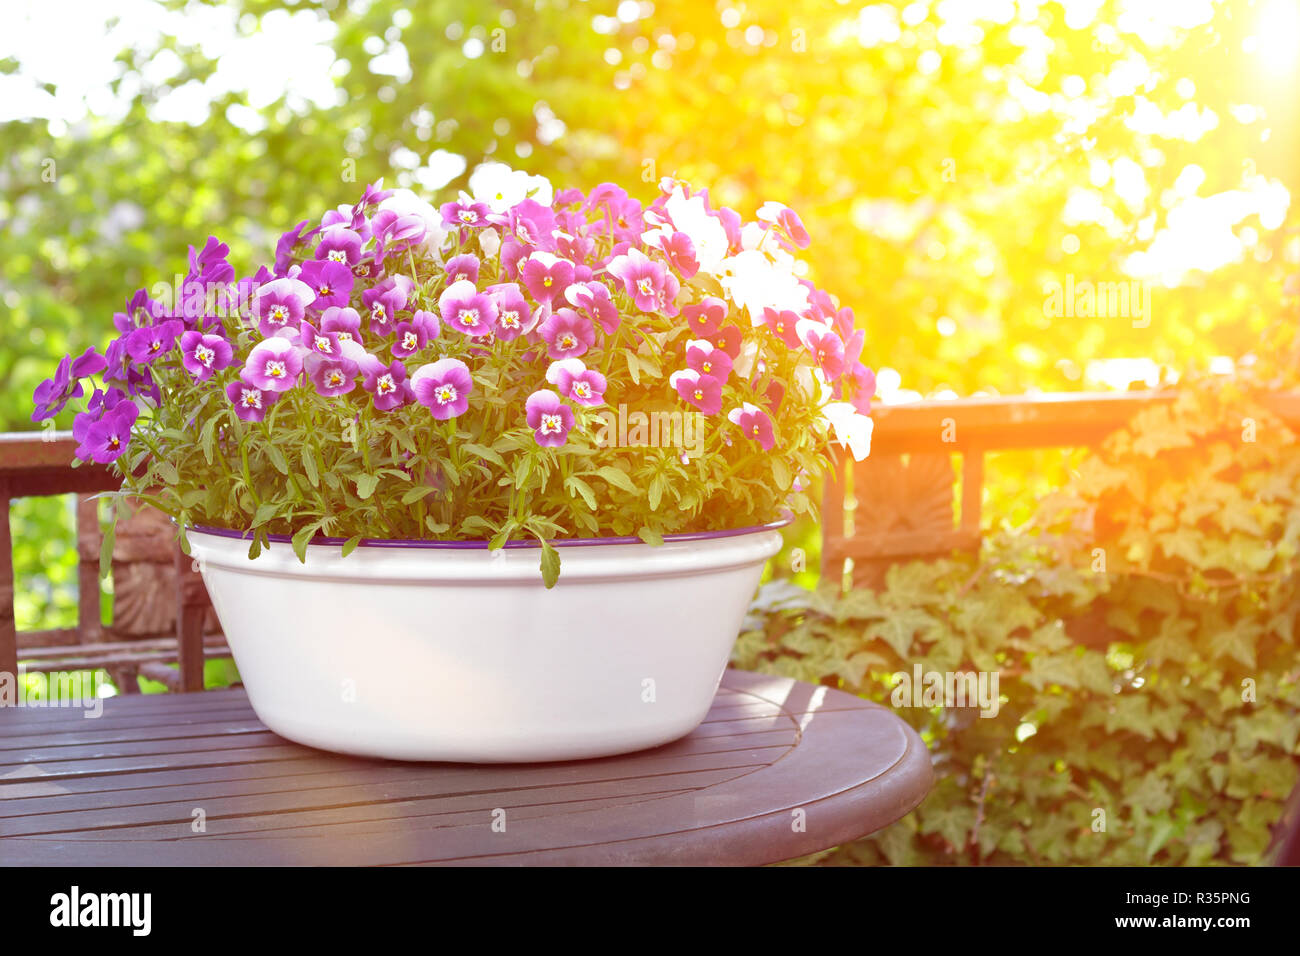 Pansy flowers in shades of lilac, violet and blue in a white vintage wash basin on a balcony table in bright sunlight, copy or text space Stock Photo